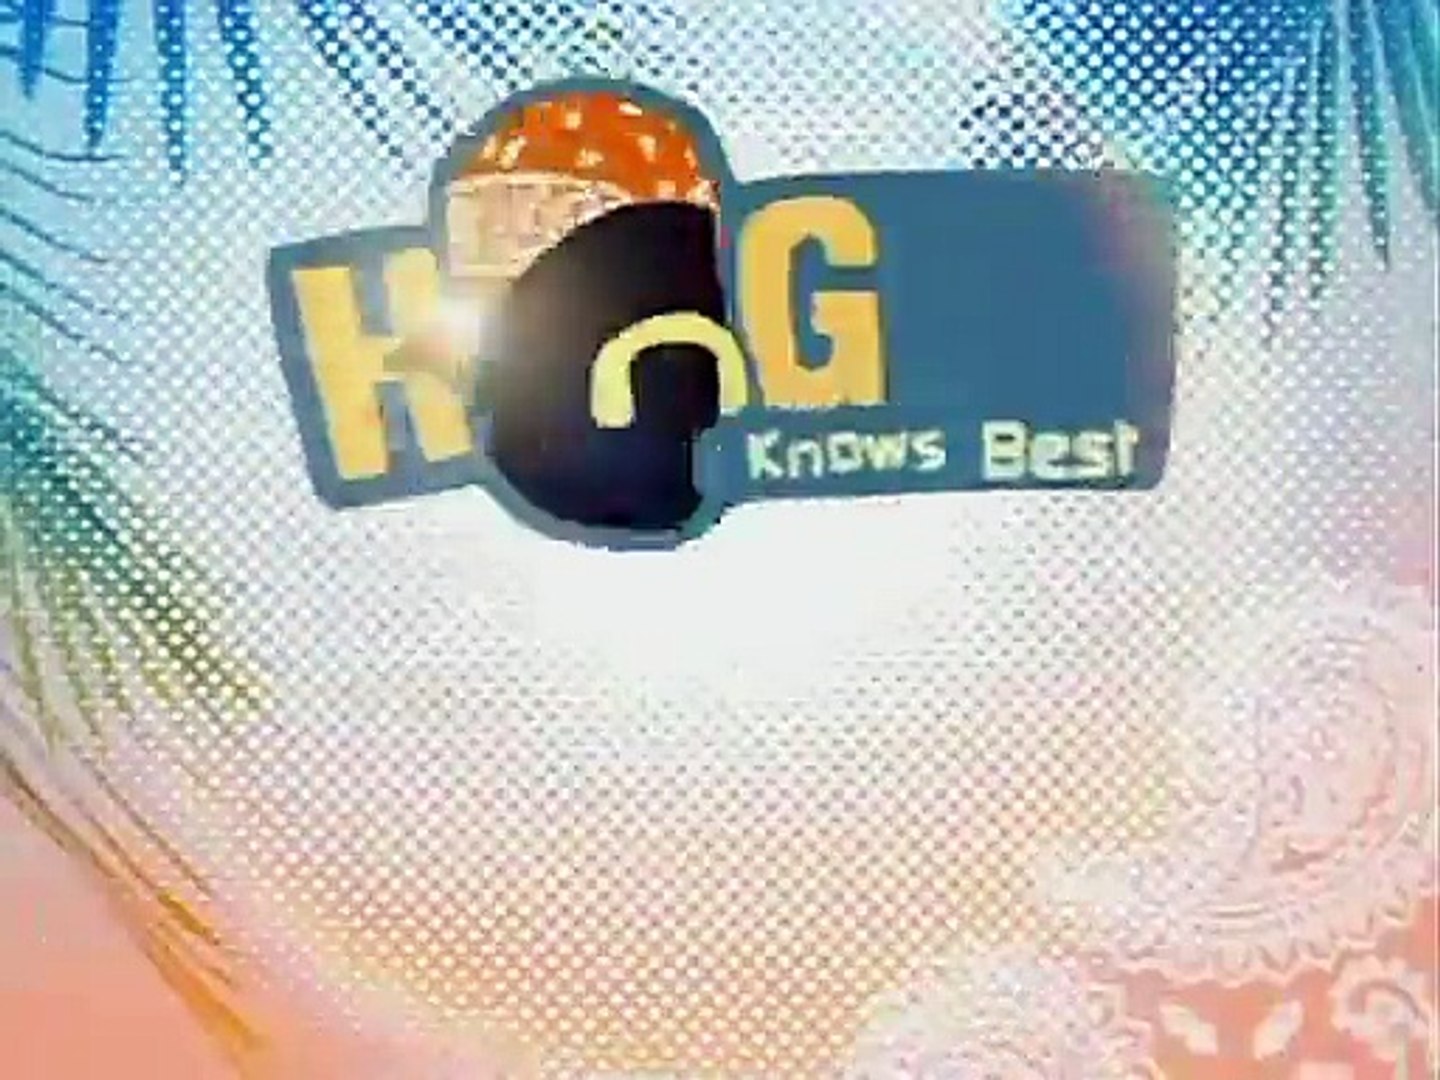 Hogan Knows Best S03E09 - video dailymotion